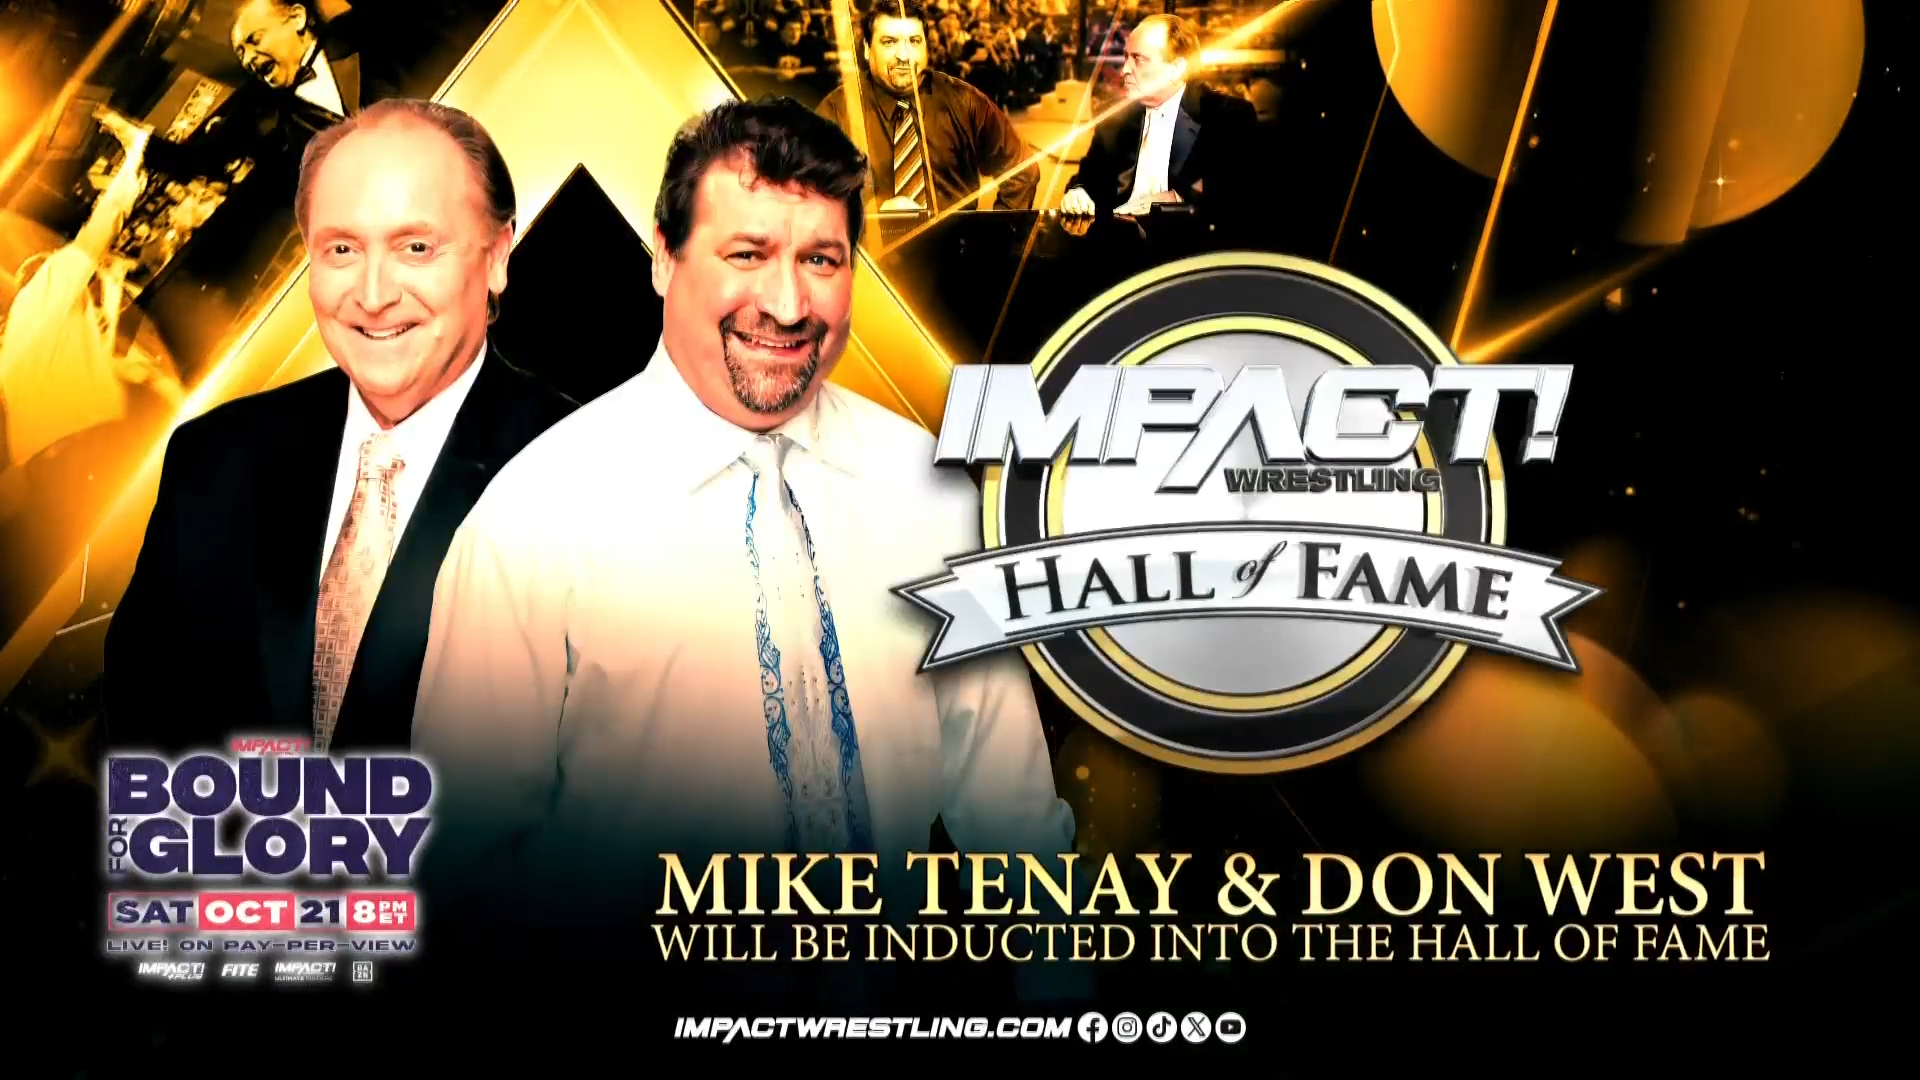 Mike Tenay & Don West To Be Inducted Into IMPACT Wrestling Hall of Fame – IMPACT Wrestling